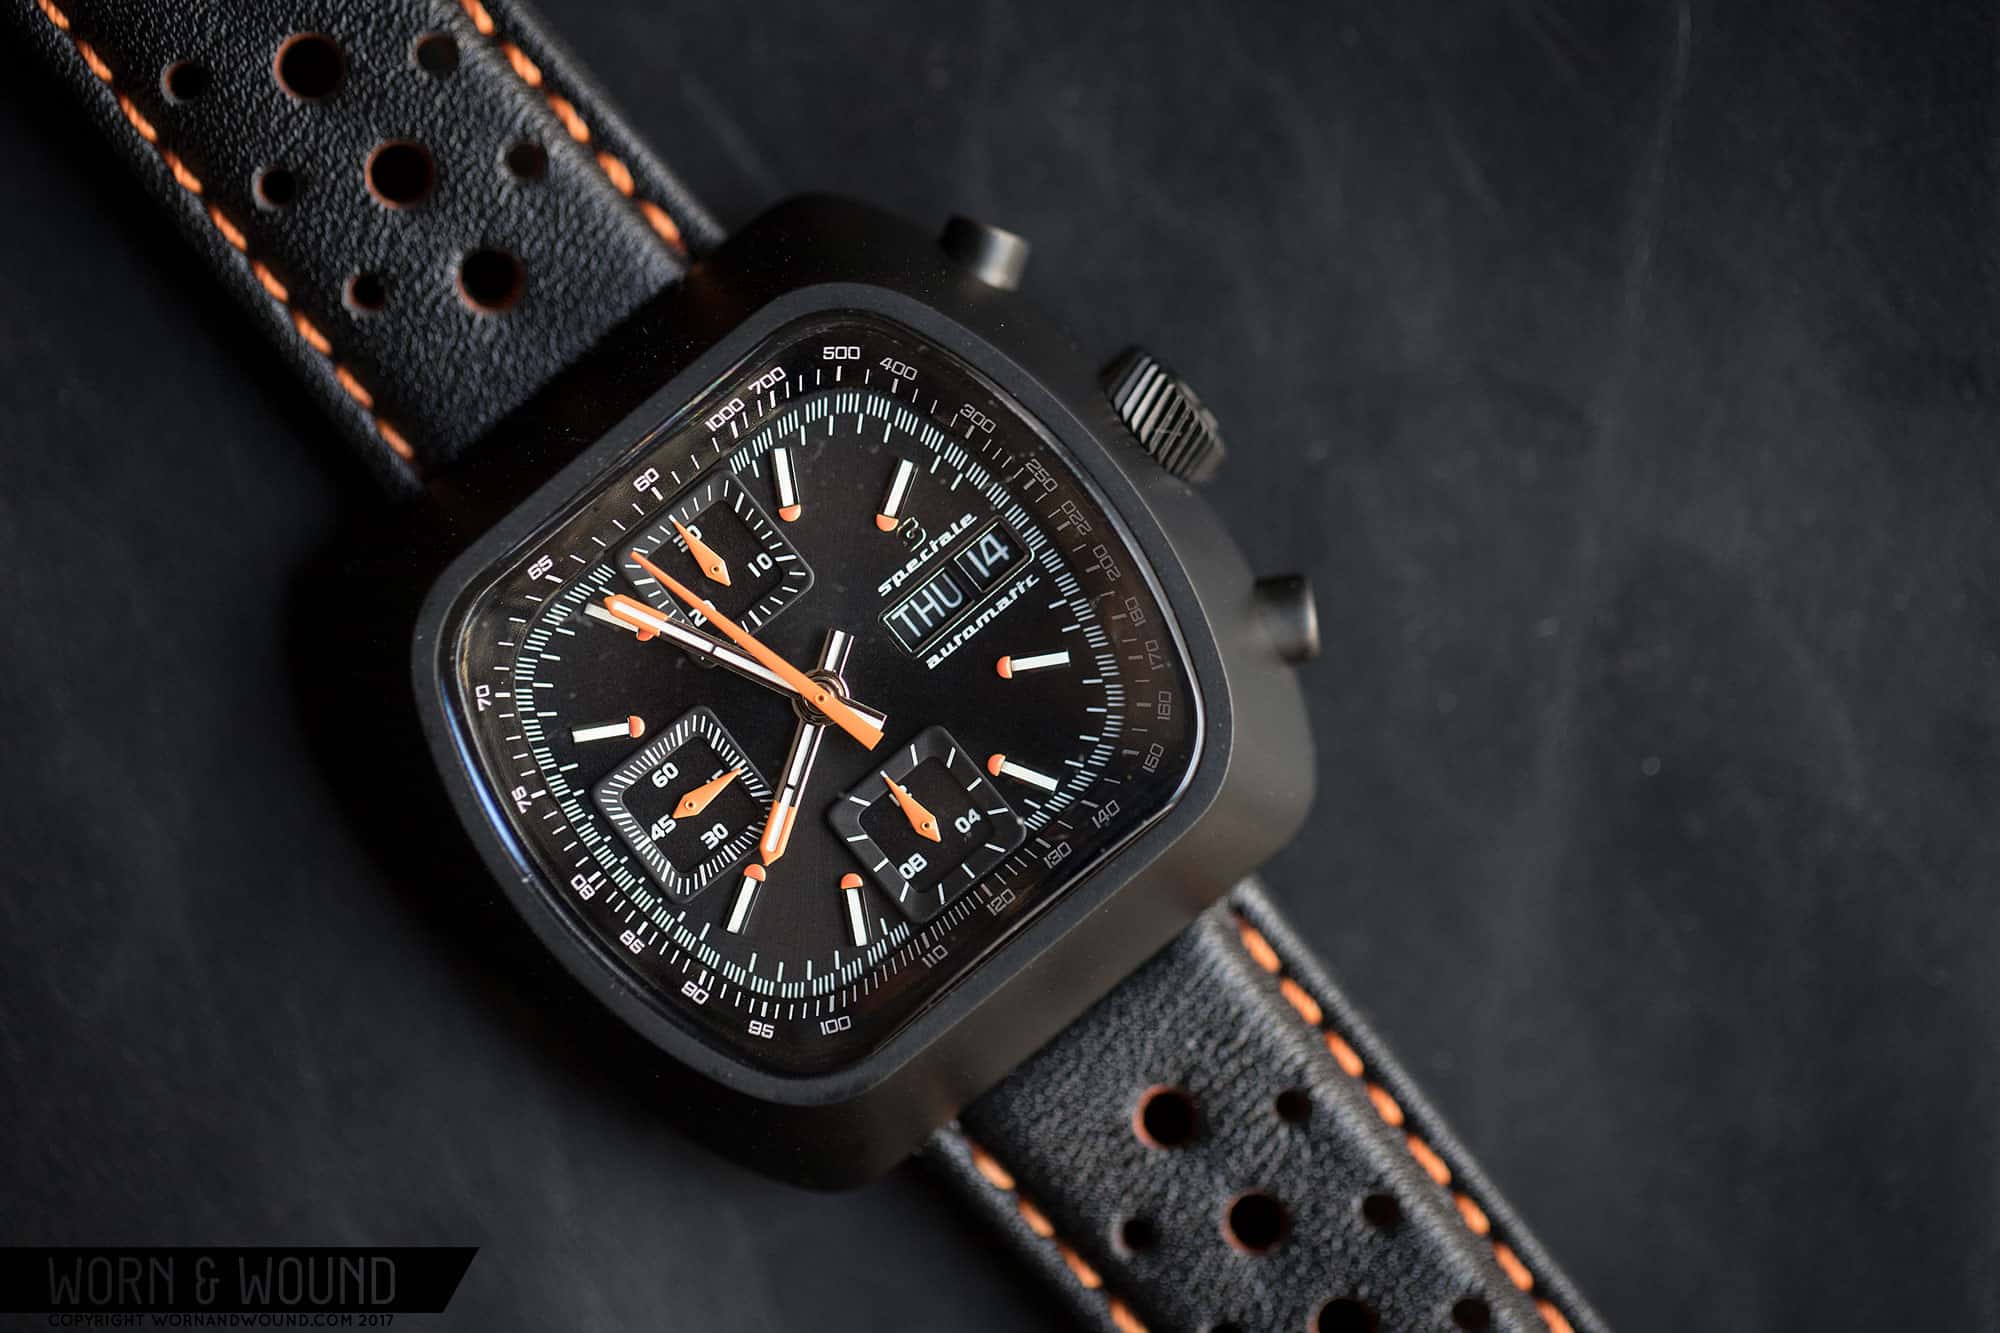 Straton Speciale Chronograph Review